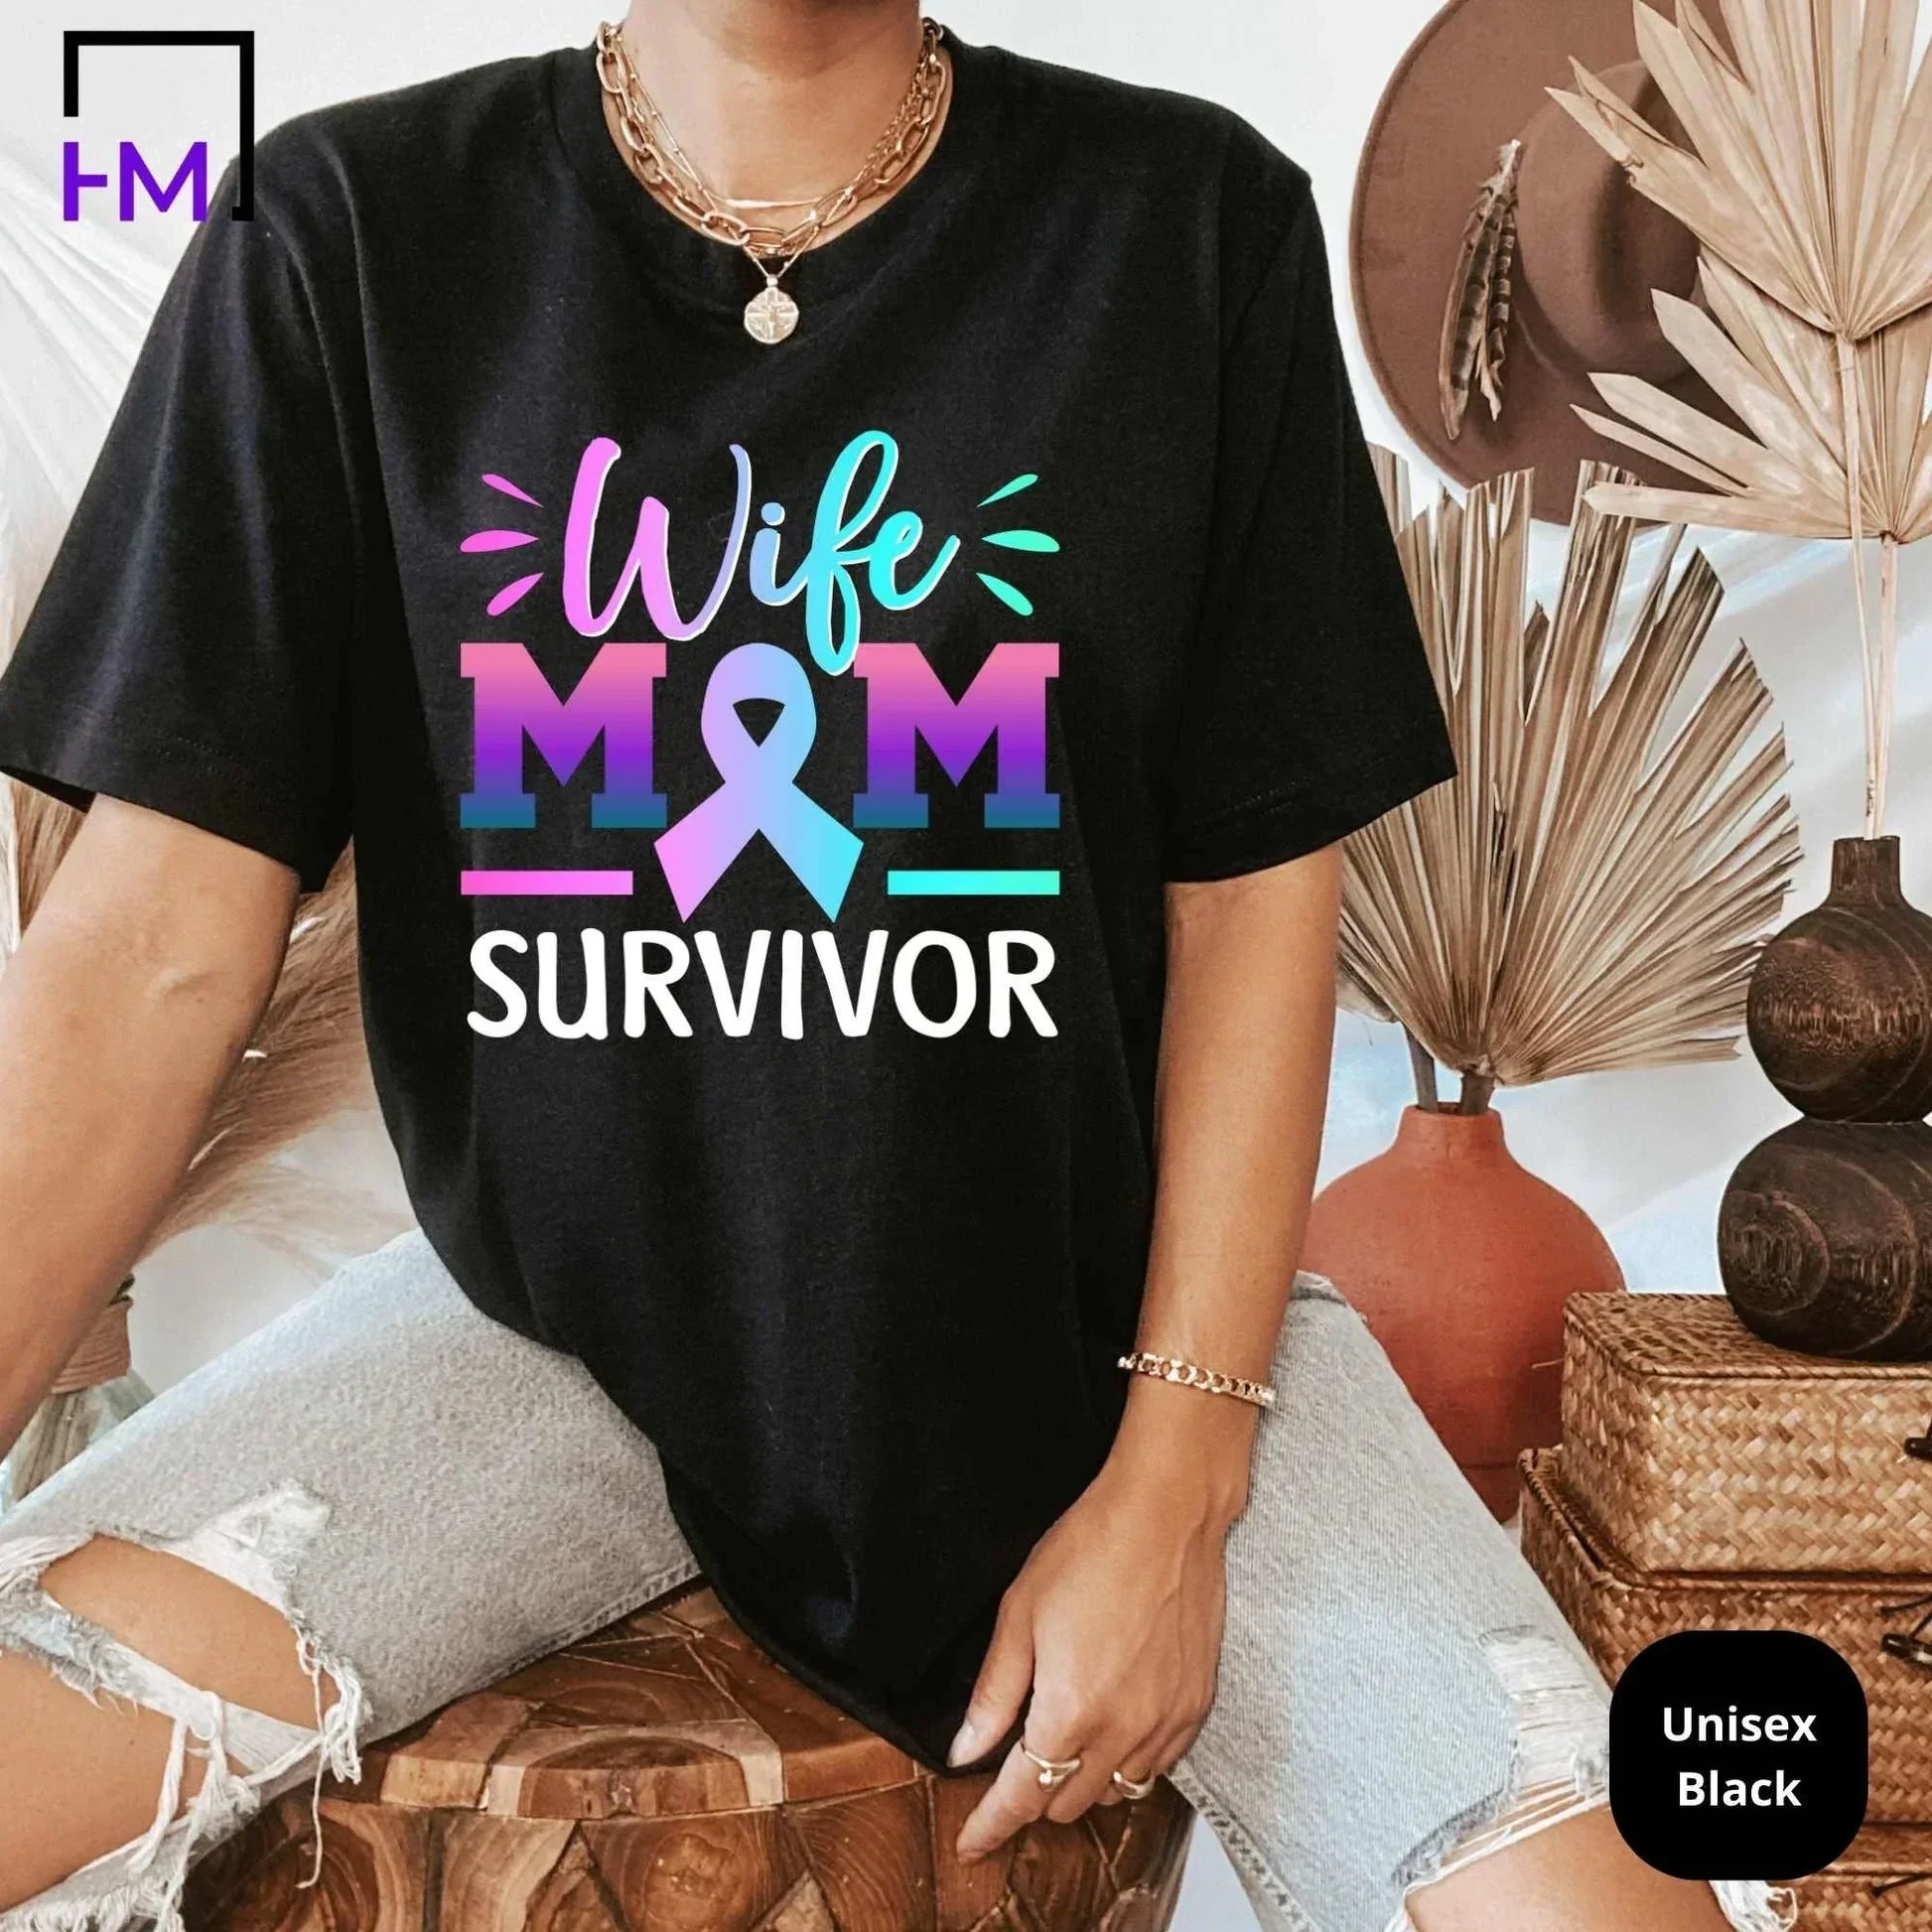 Thyroid Cancer Shirt, Mom Cancer Fighter Tops, Survivor Gift for Wife, Purple Teal Pink Ribbon, Thyroid Cancer Awareness Gift for Her